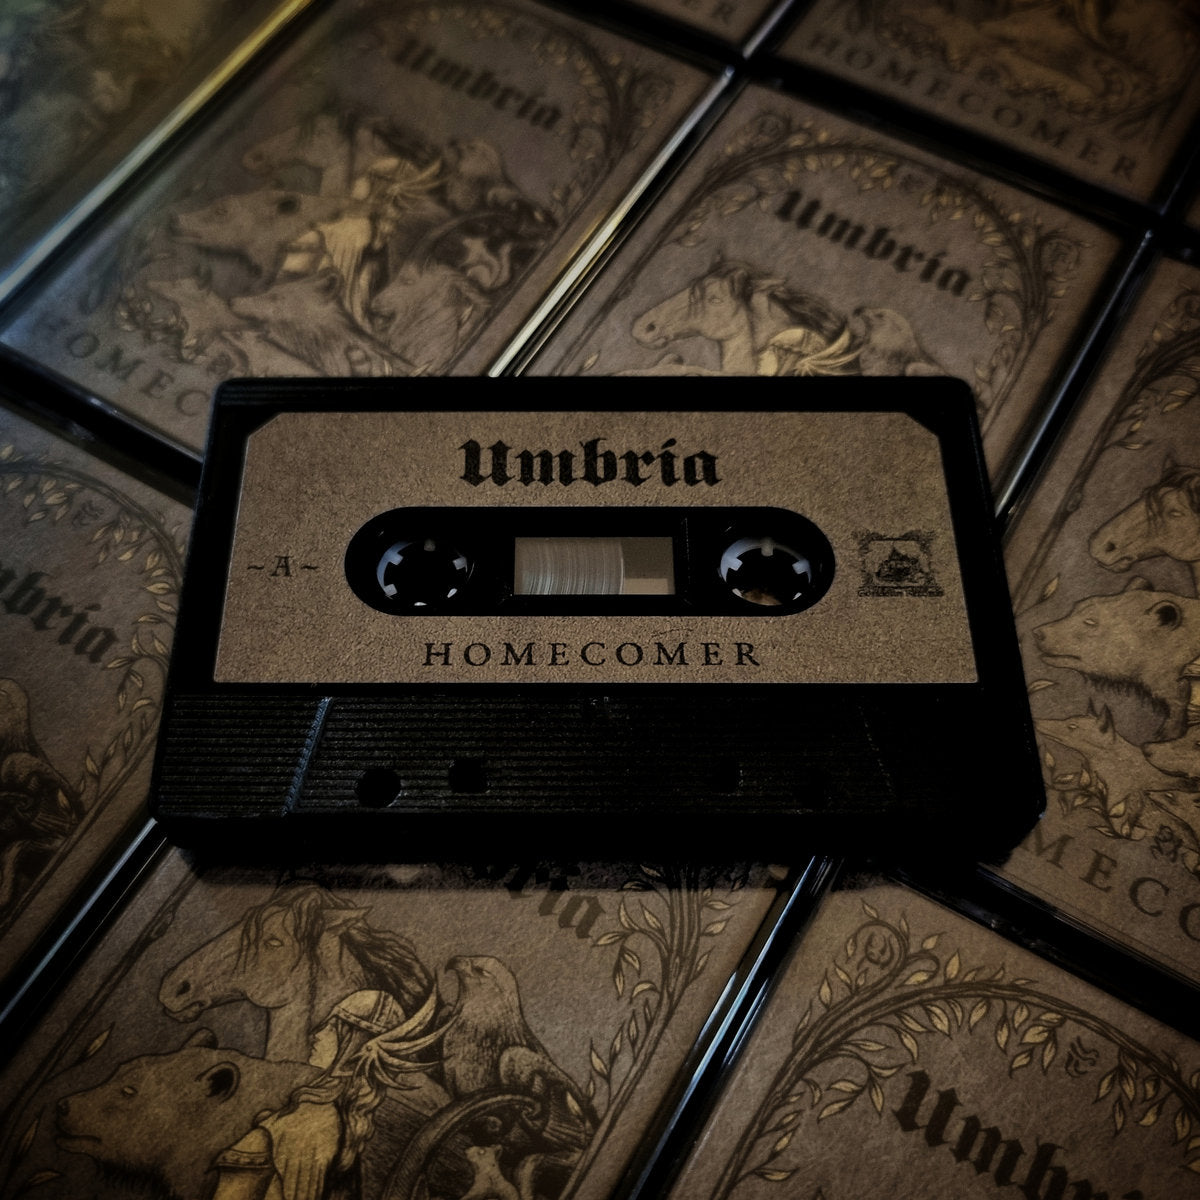 [SOLD OUT] UMBRIA "Homecomer" Cassette Tape (lim.150)